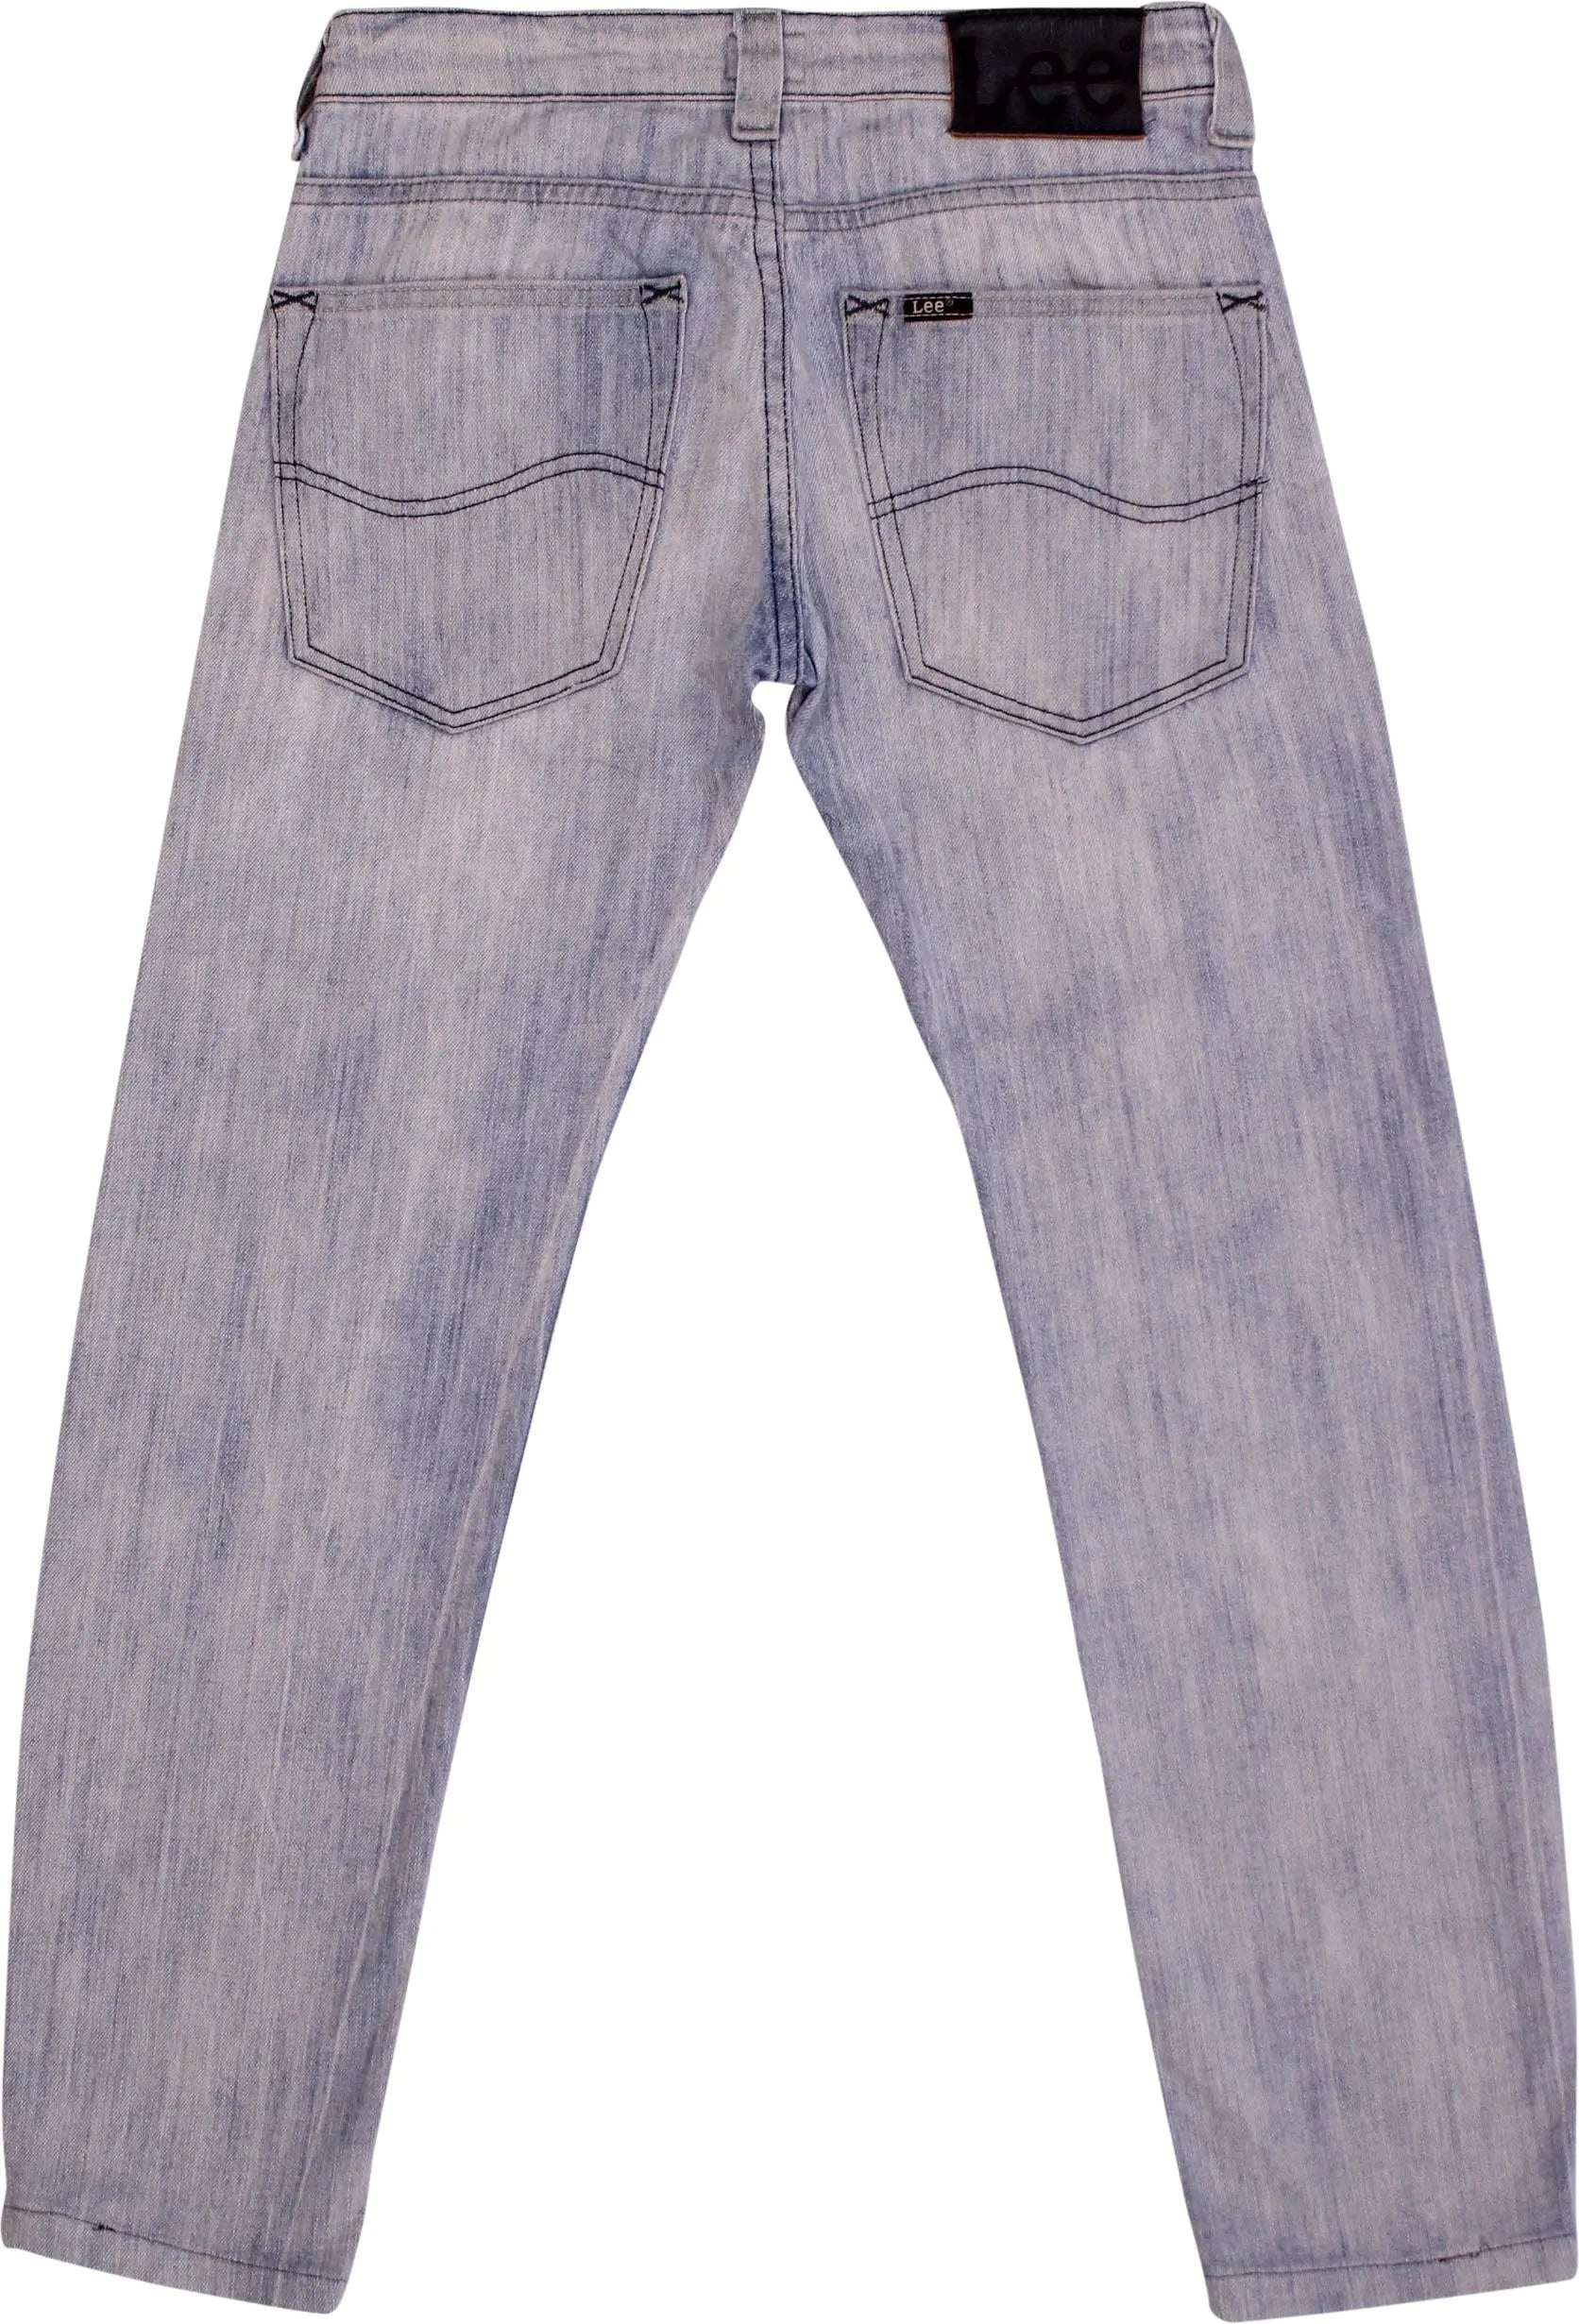 Lee - Lee Low Waist Slim Fit Jeans- ThriftTale.com - Vintage and second handclothing